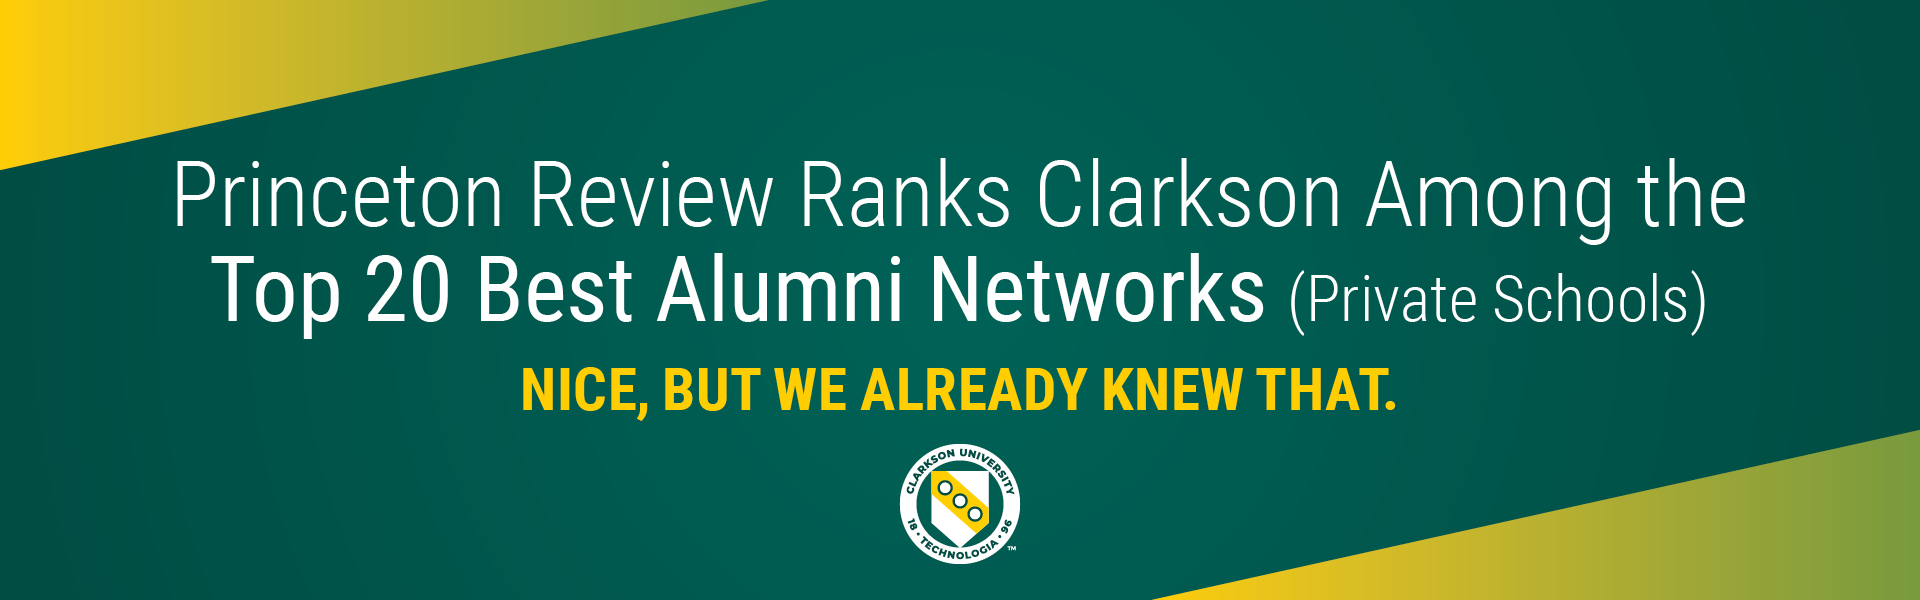 Princeton Review ranks Clarkson Among the Top 20 Best Alumni Networks (Private Schools). Nice, but we already knew that.